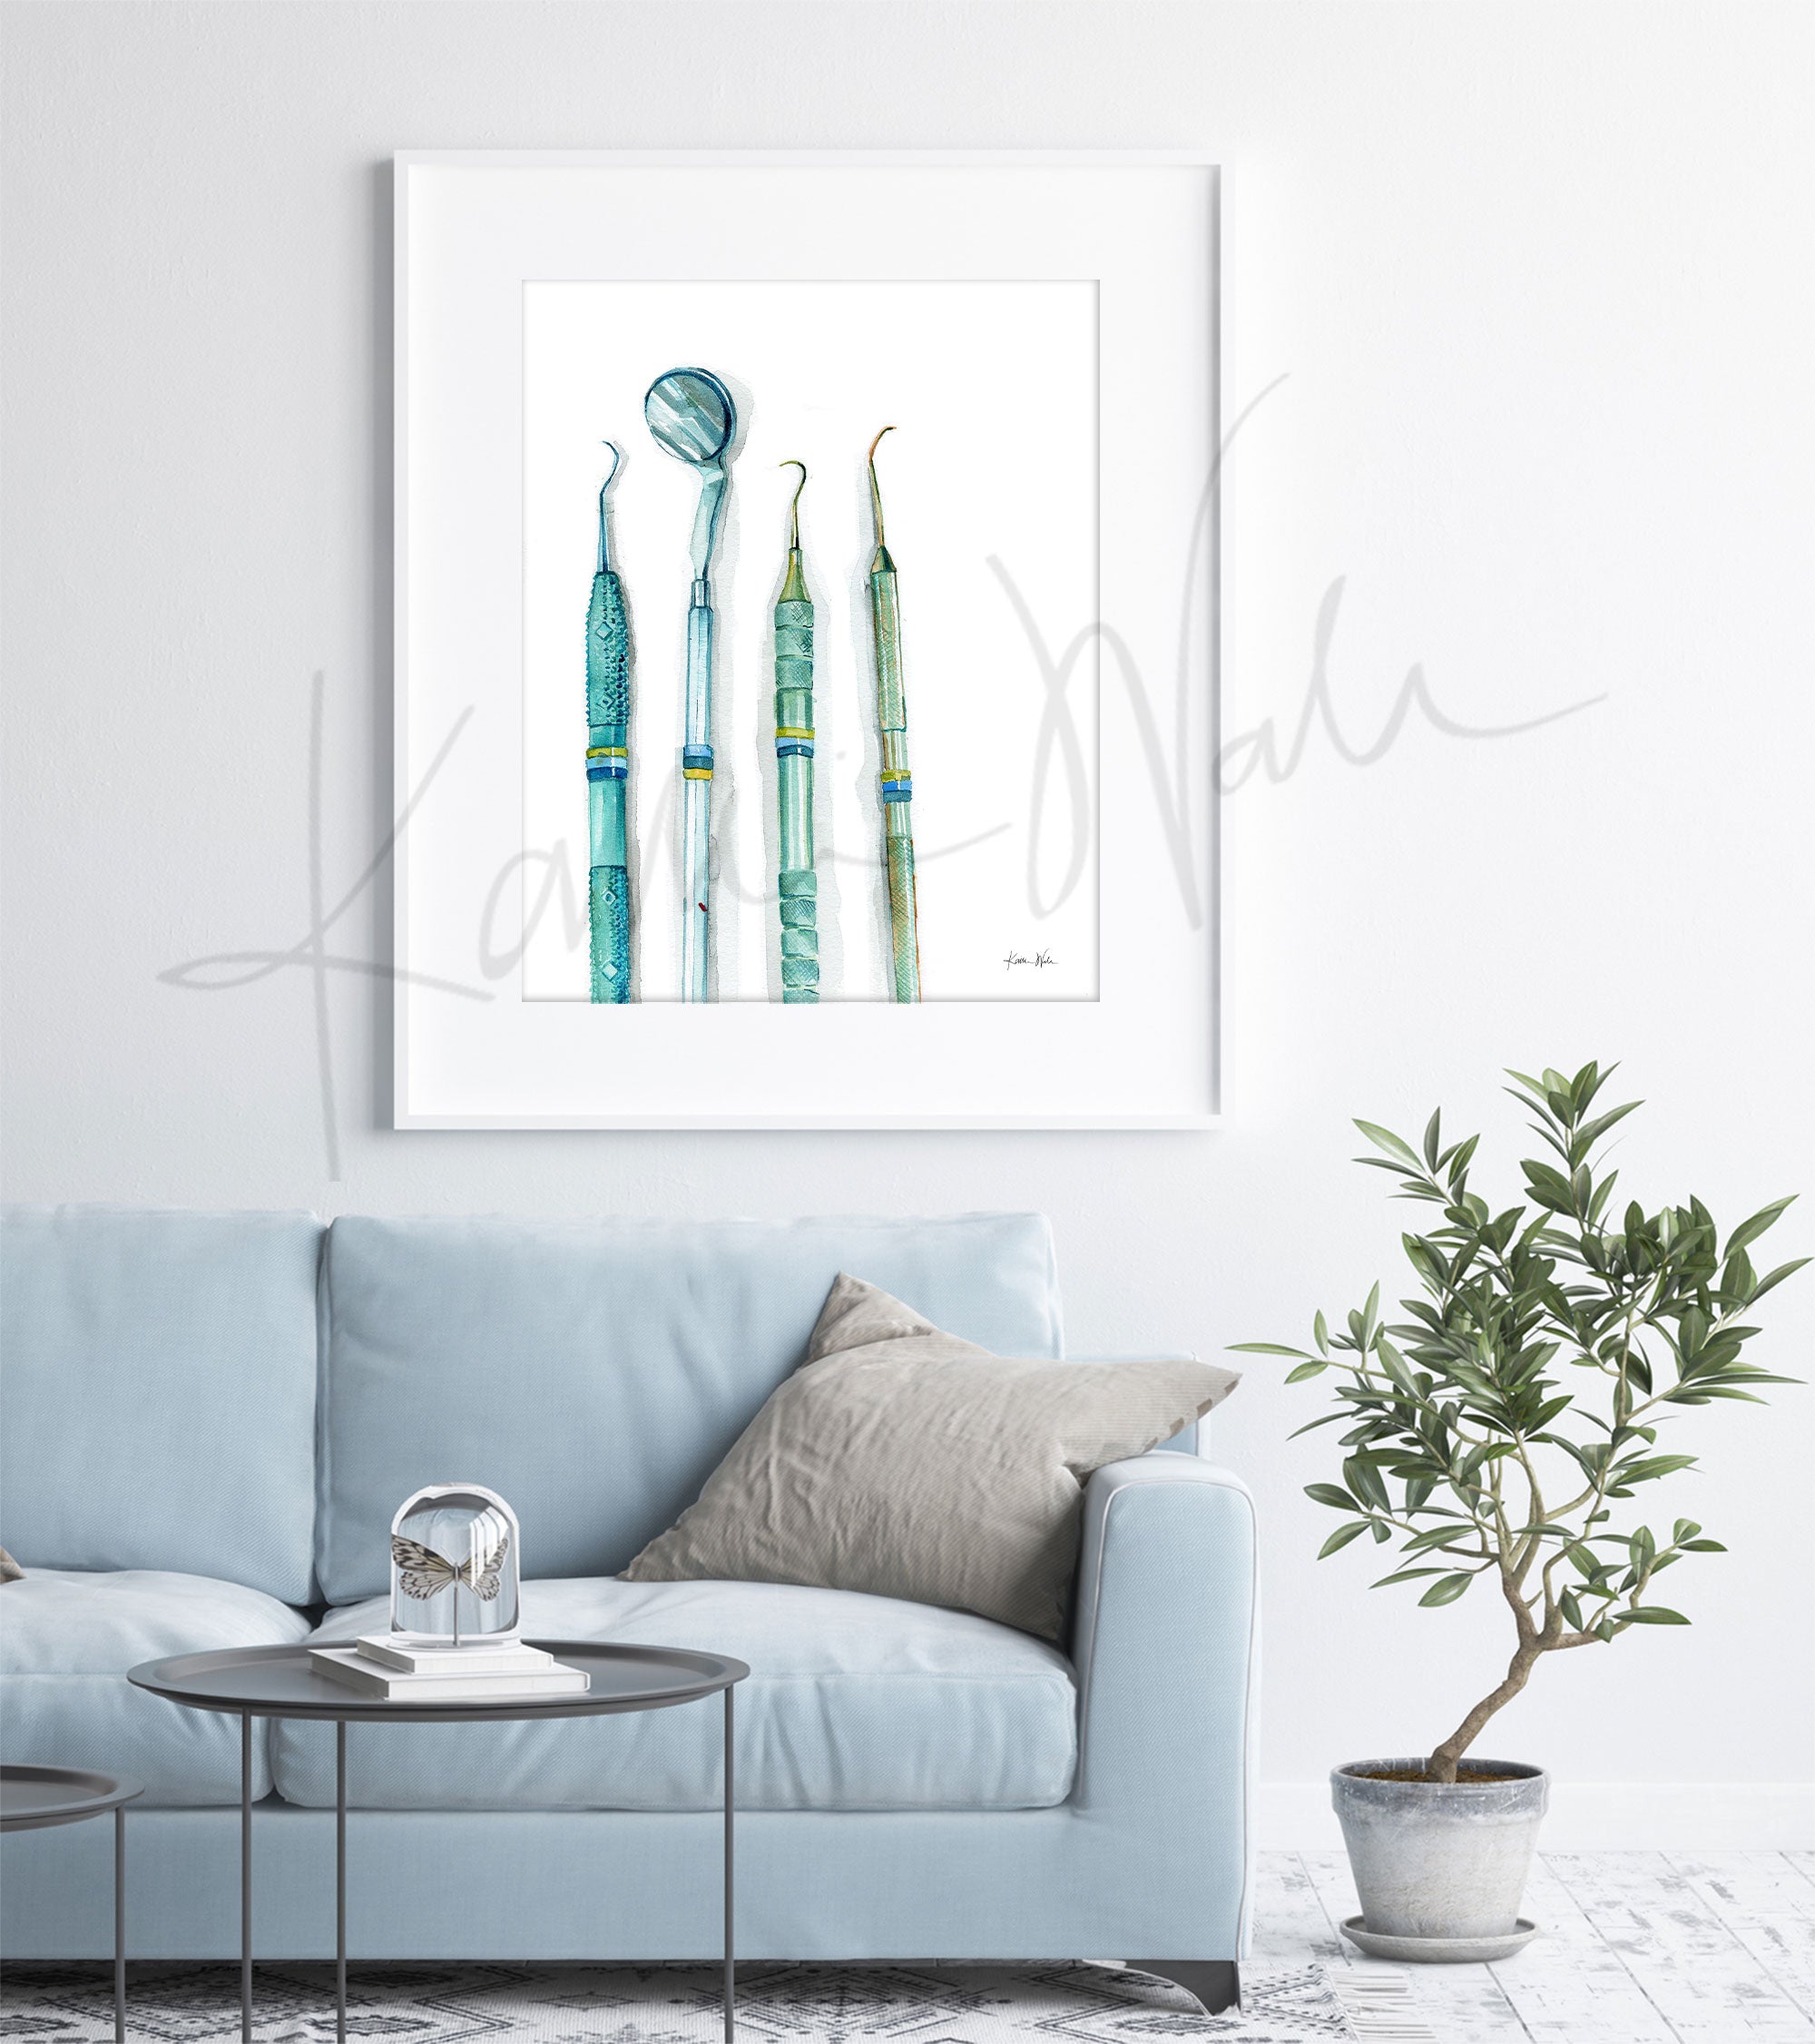 Framed watercolor print of dental hygienist tools. The painting is hanging over a blue couch.